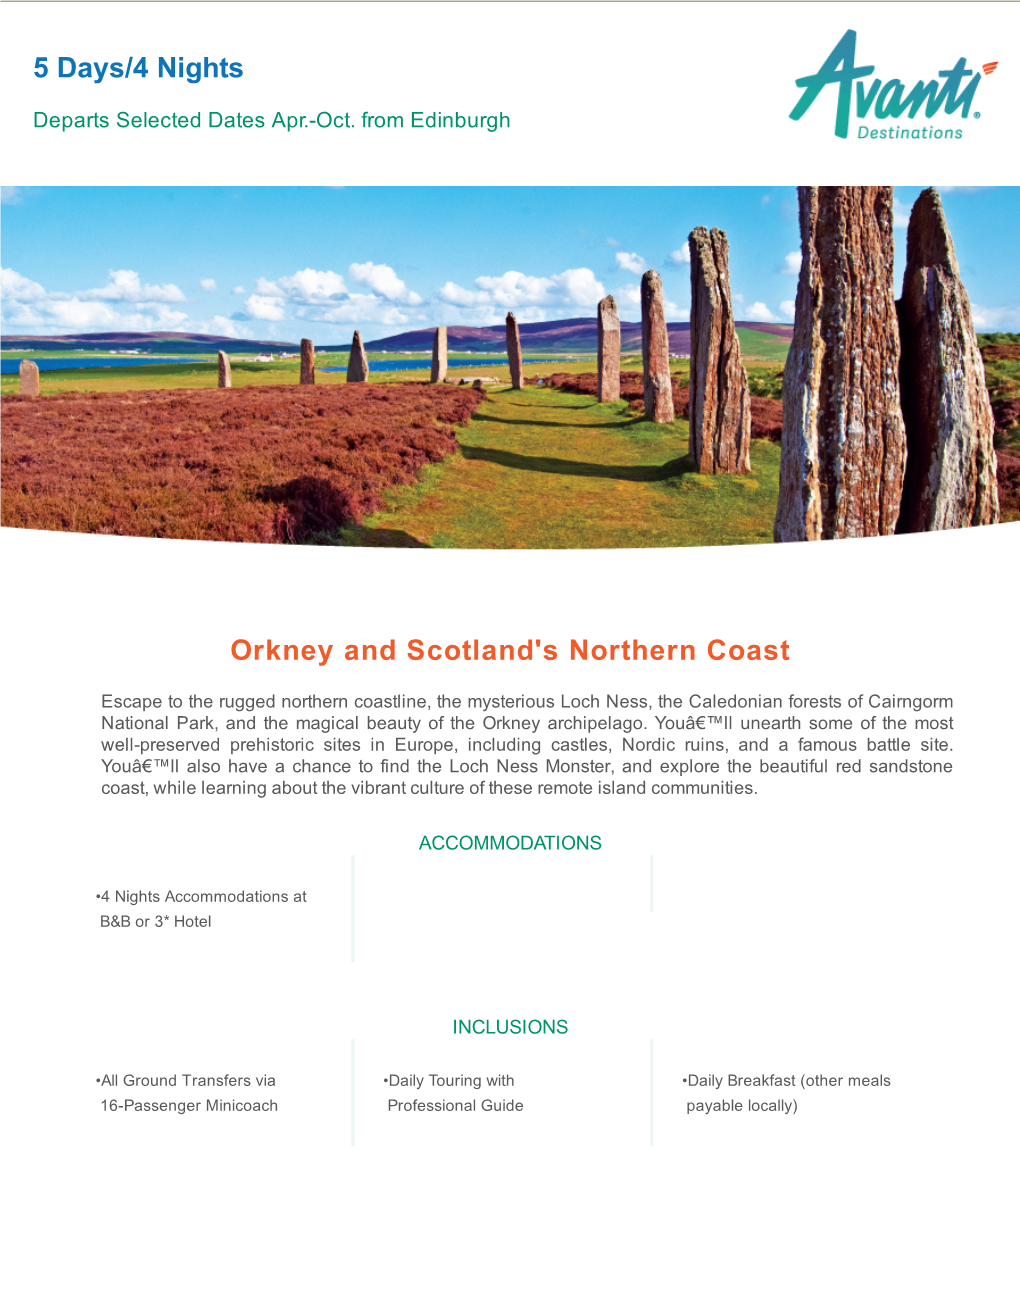 Orkney and Scotland's Northern Coast